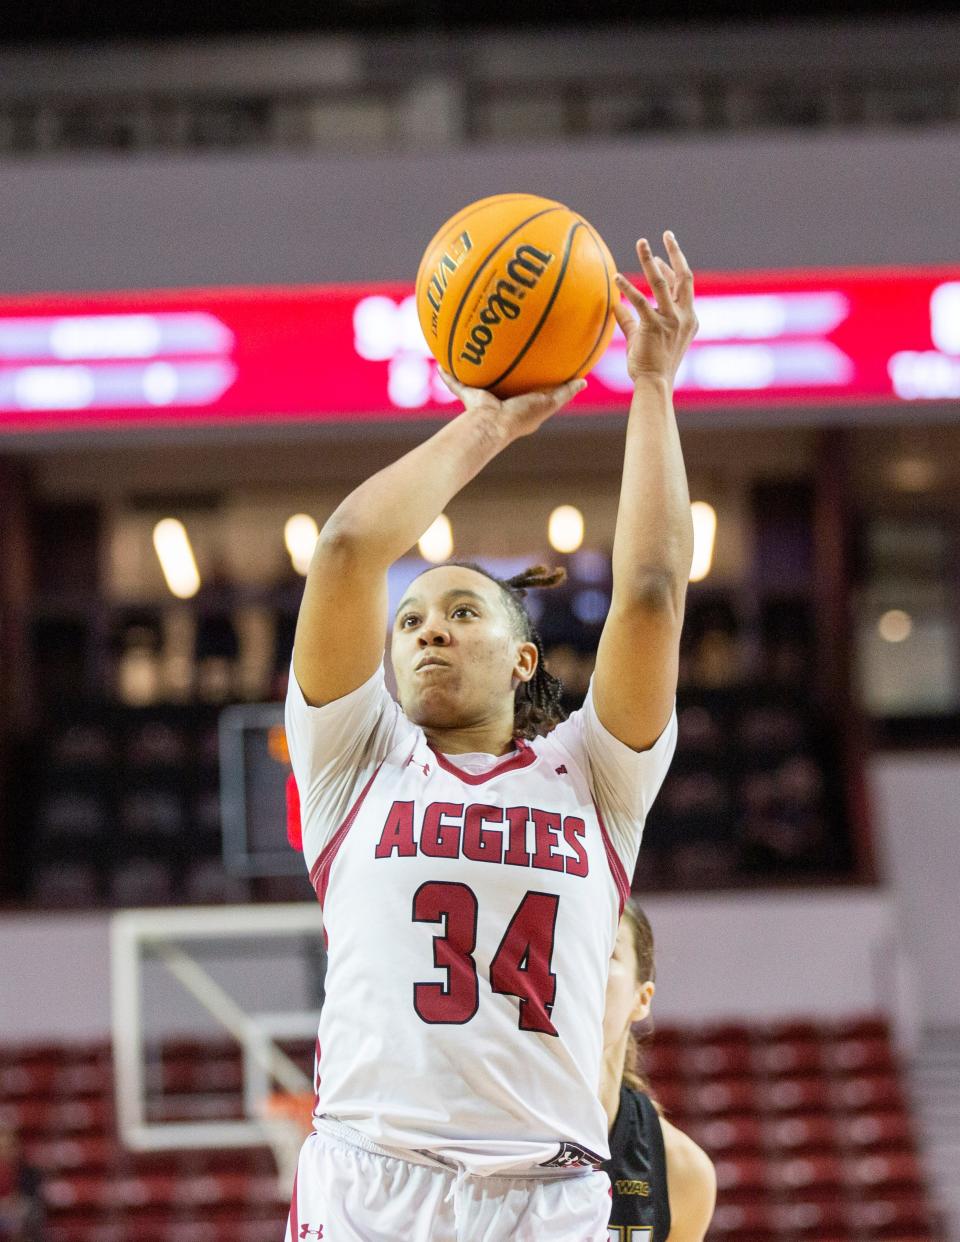 NMSU guard Tayelin Grays shoots a basket during a college basketball game on Saturday, Feb. 18, 2023, at the Pan American Center